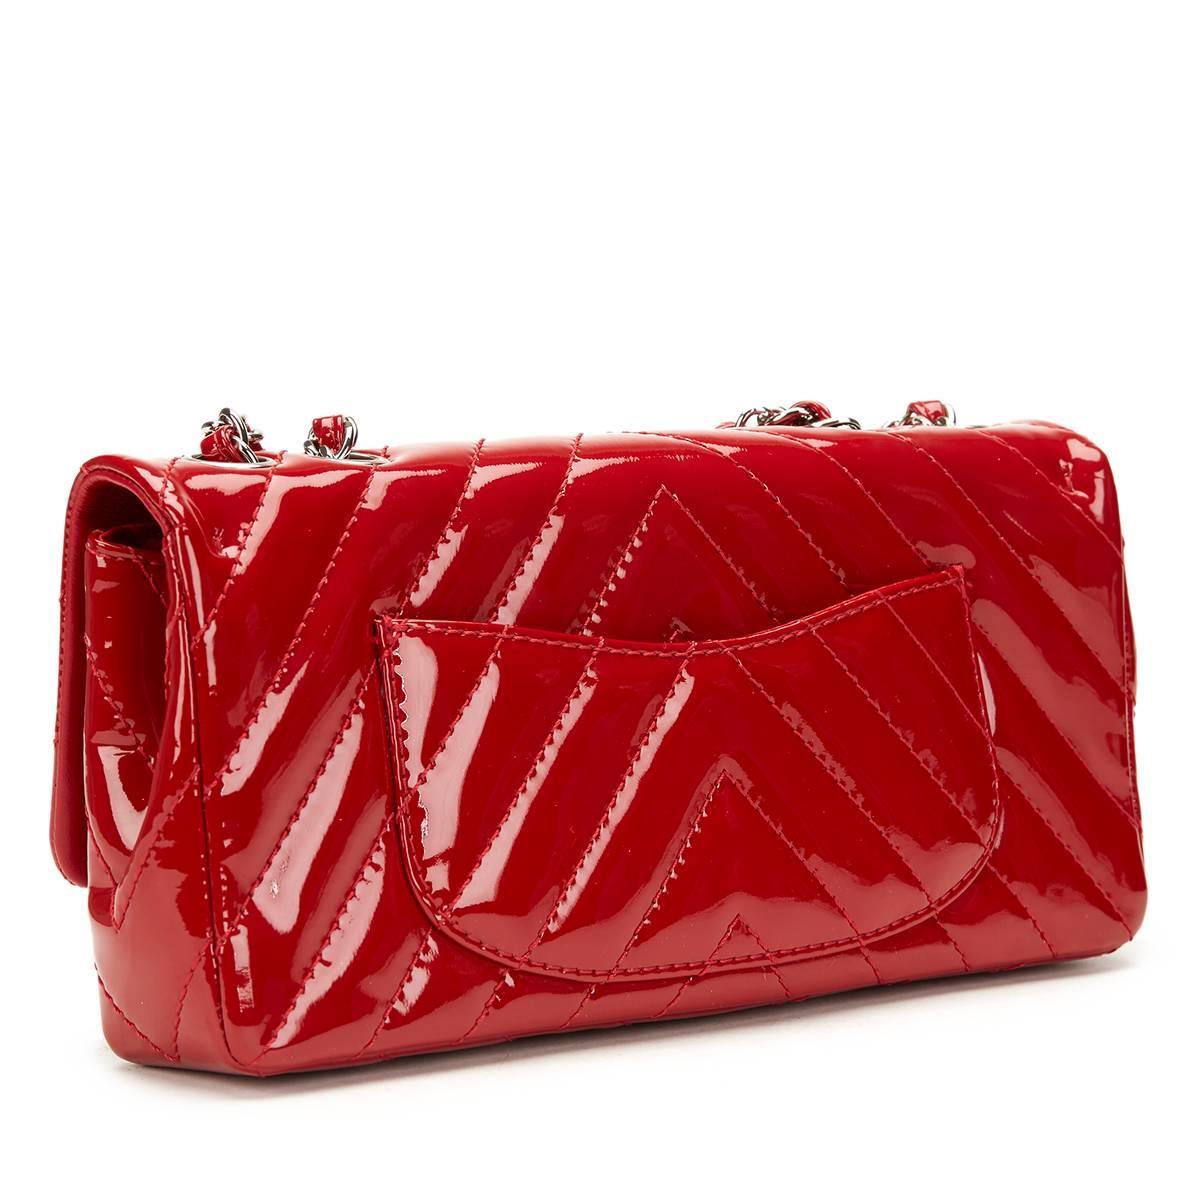 Women's 2000s Chanel Red Chevron Quilted Patent Leather East West Single Flap Bag